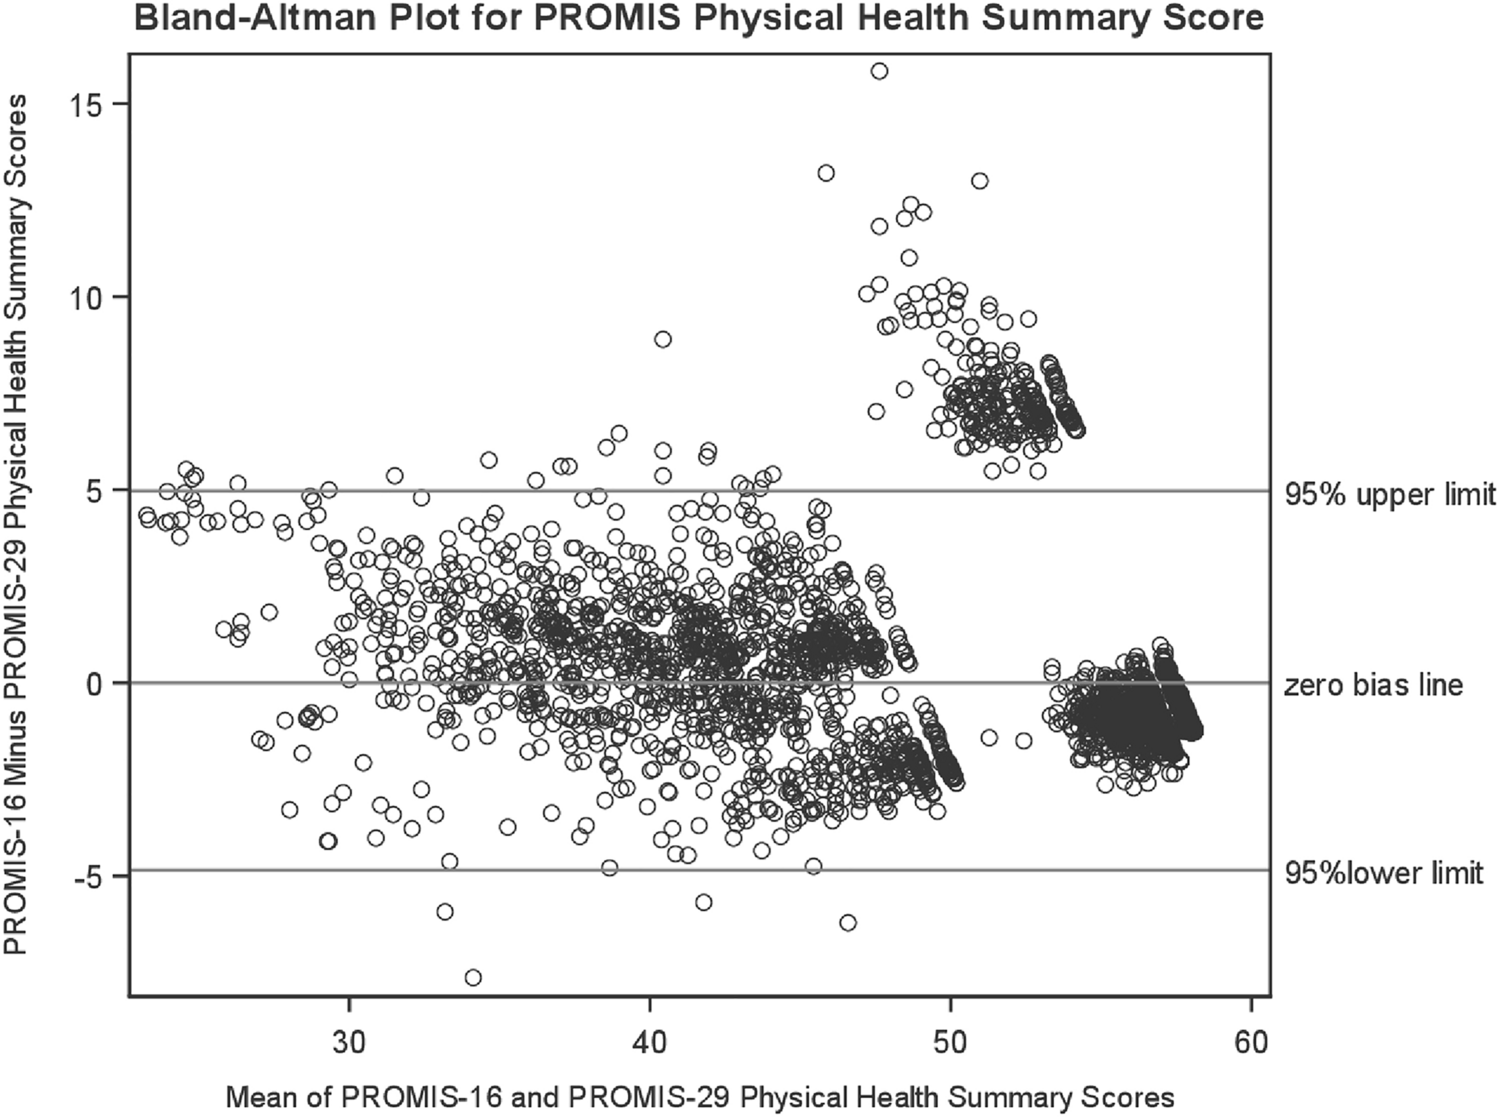 The PROMIS-16 reproduces the PROMIS-29 physical and mental health summary scores accurately in a probability-based internet panel